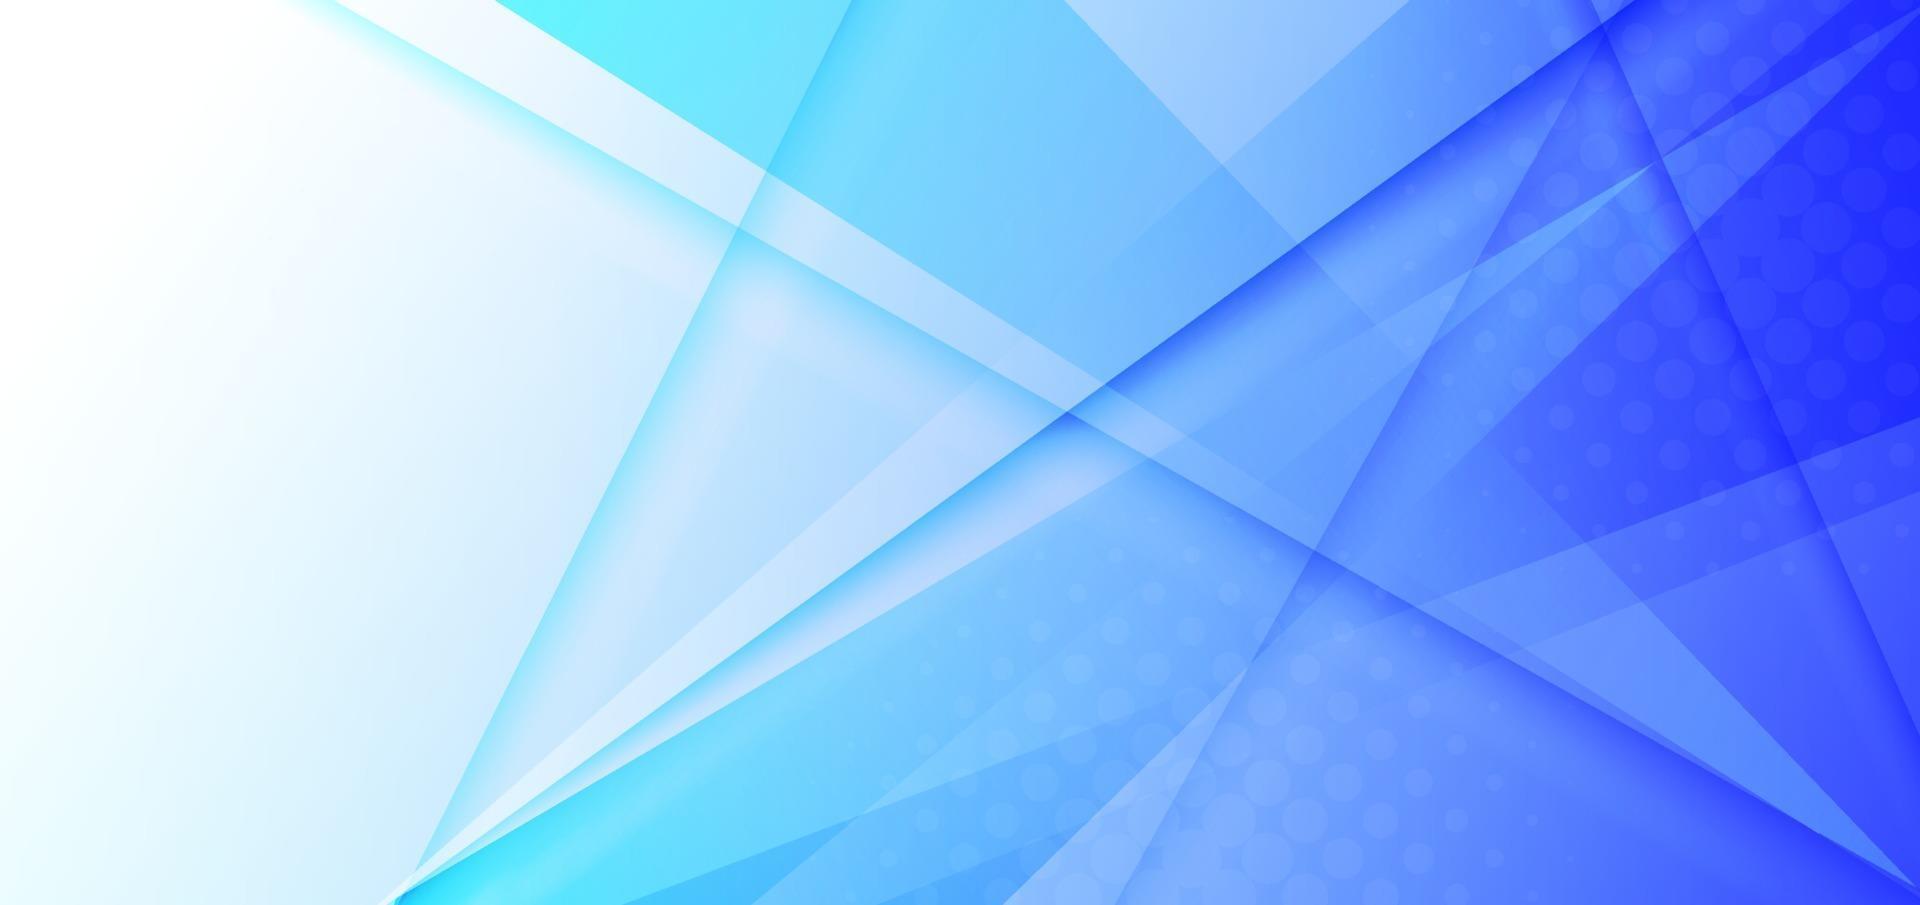 Abstract white and blue gradient triangles overlapping background. vector